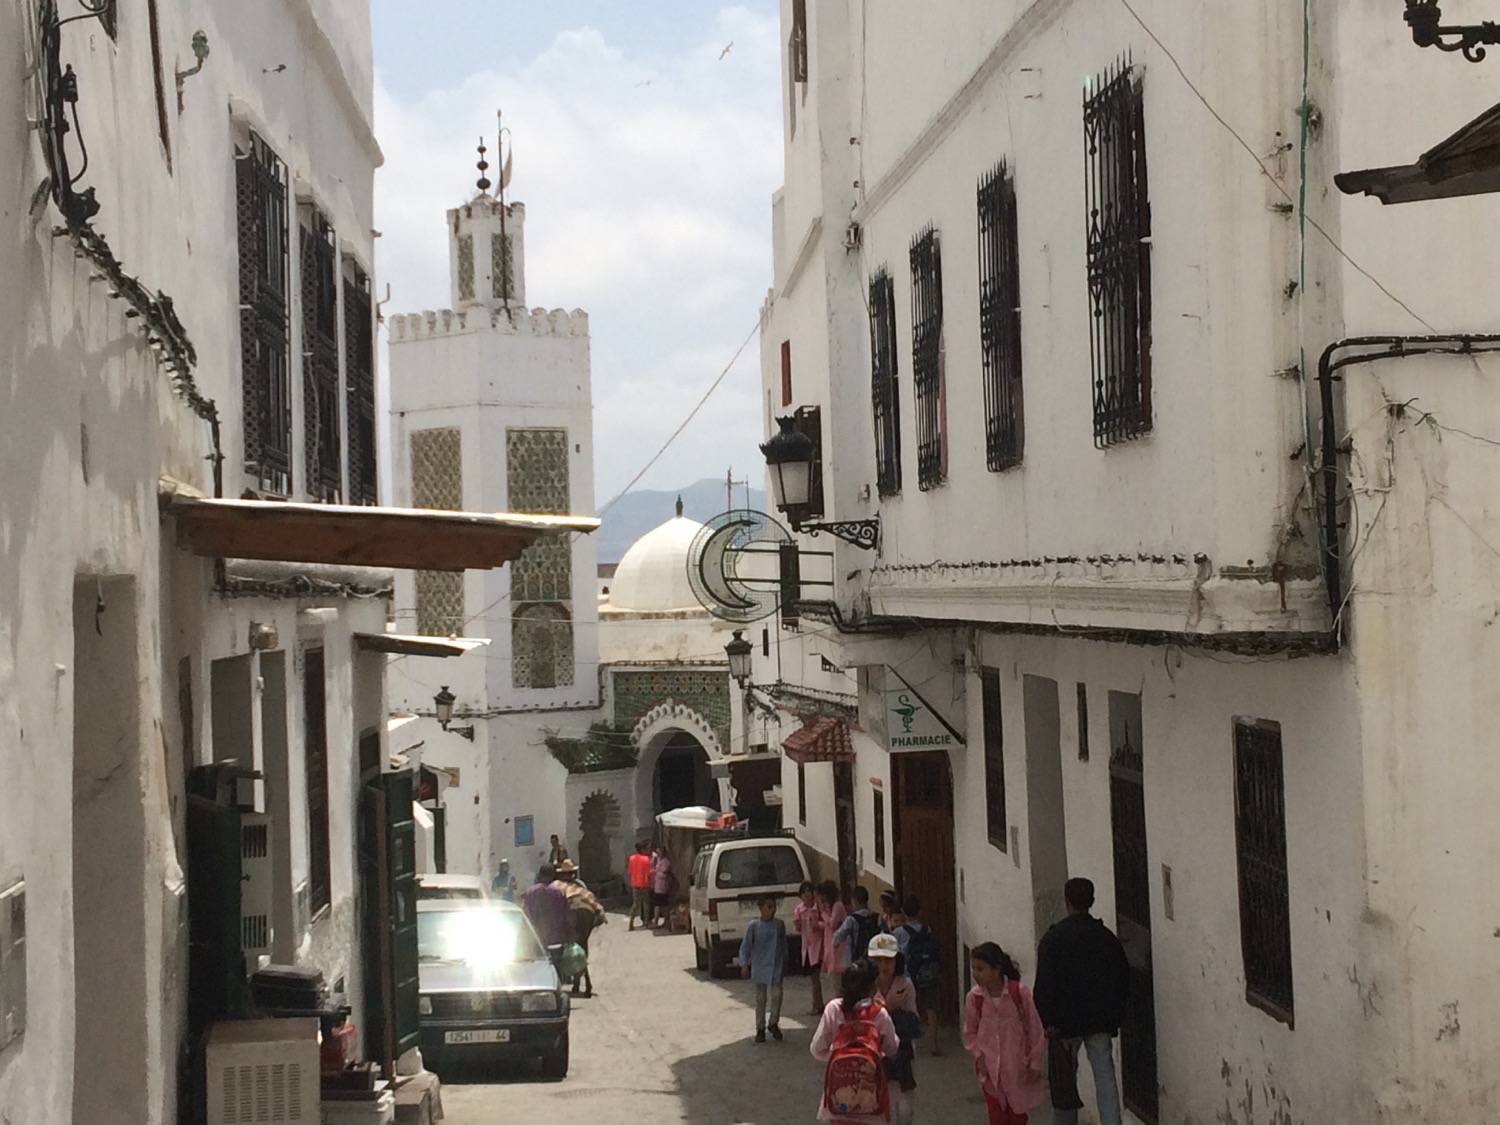 View down the street to the mosque